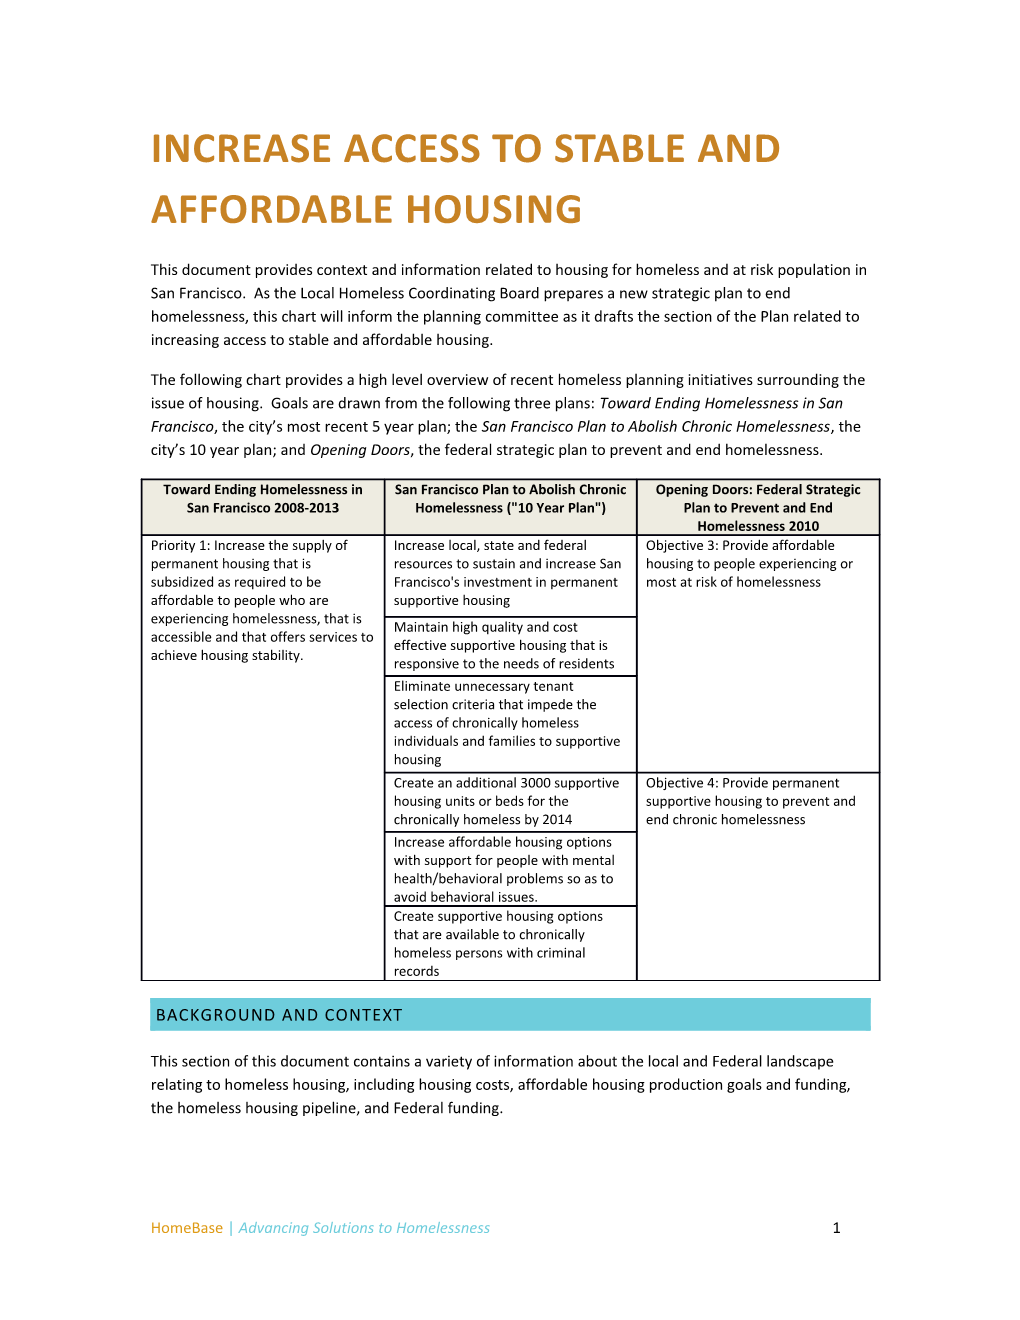 Increase Access to Stable and Affordable Housing